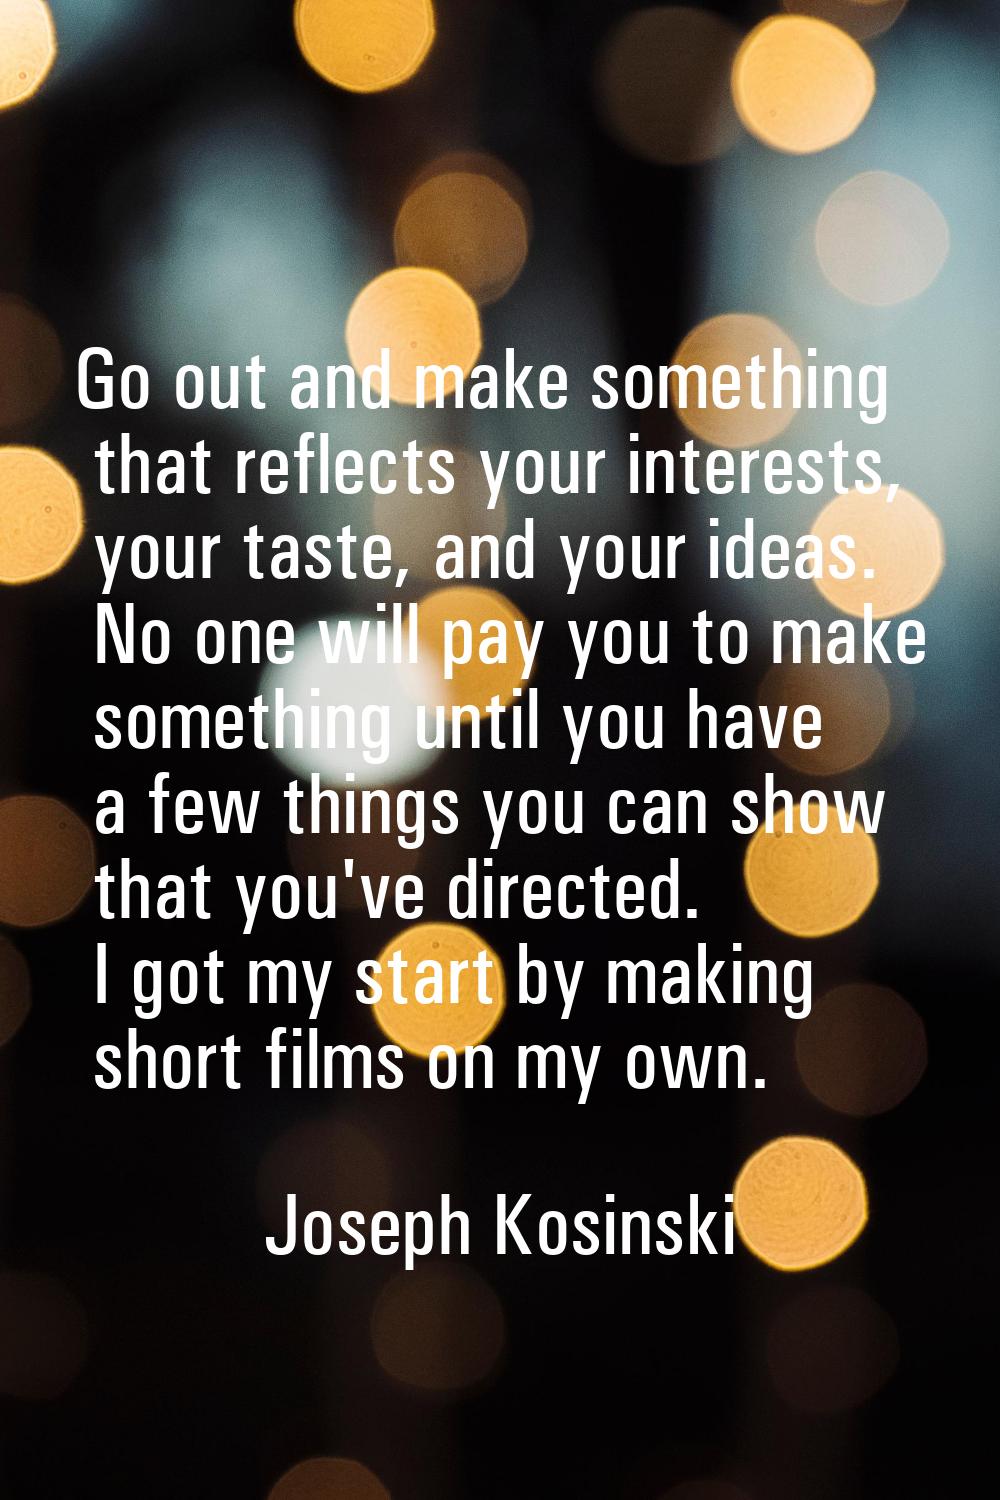 Go out and make something that reflects your interests, your taste, and your ideas. No one will pay